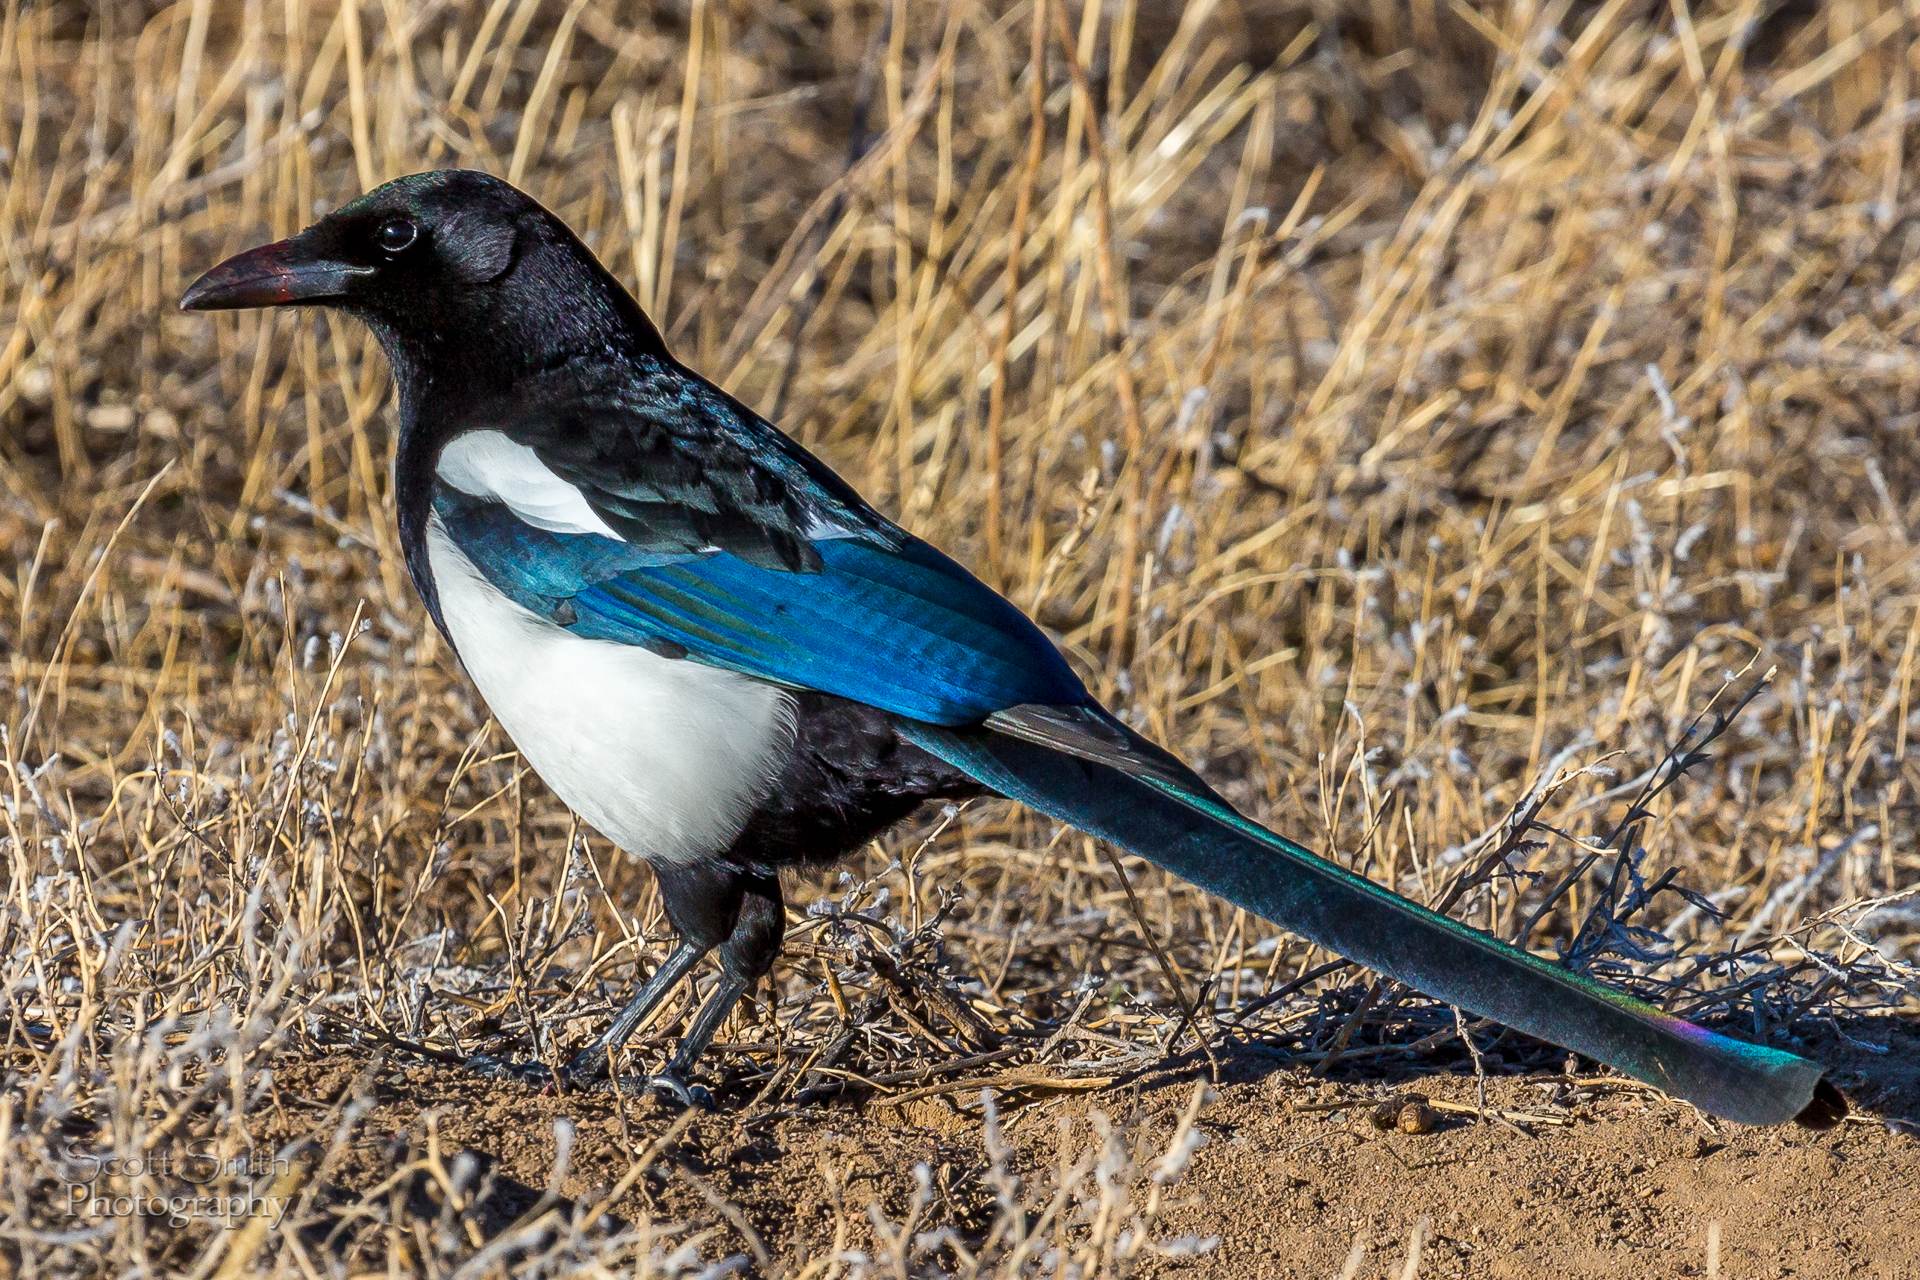 Magpie A magpie enjoying some carrion at the Rocky Mountain Arsenal Wildlife Refuge. by Scott Smith Photos